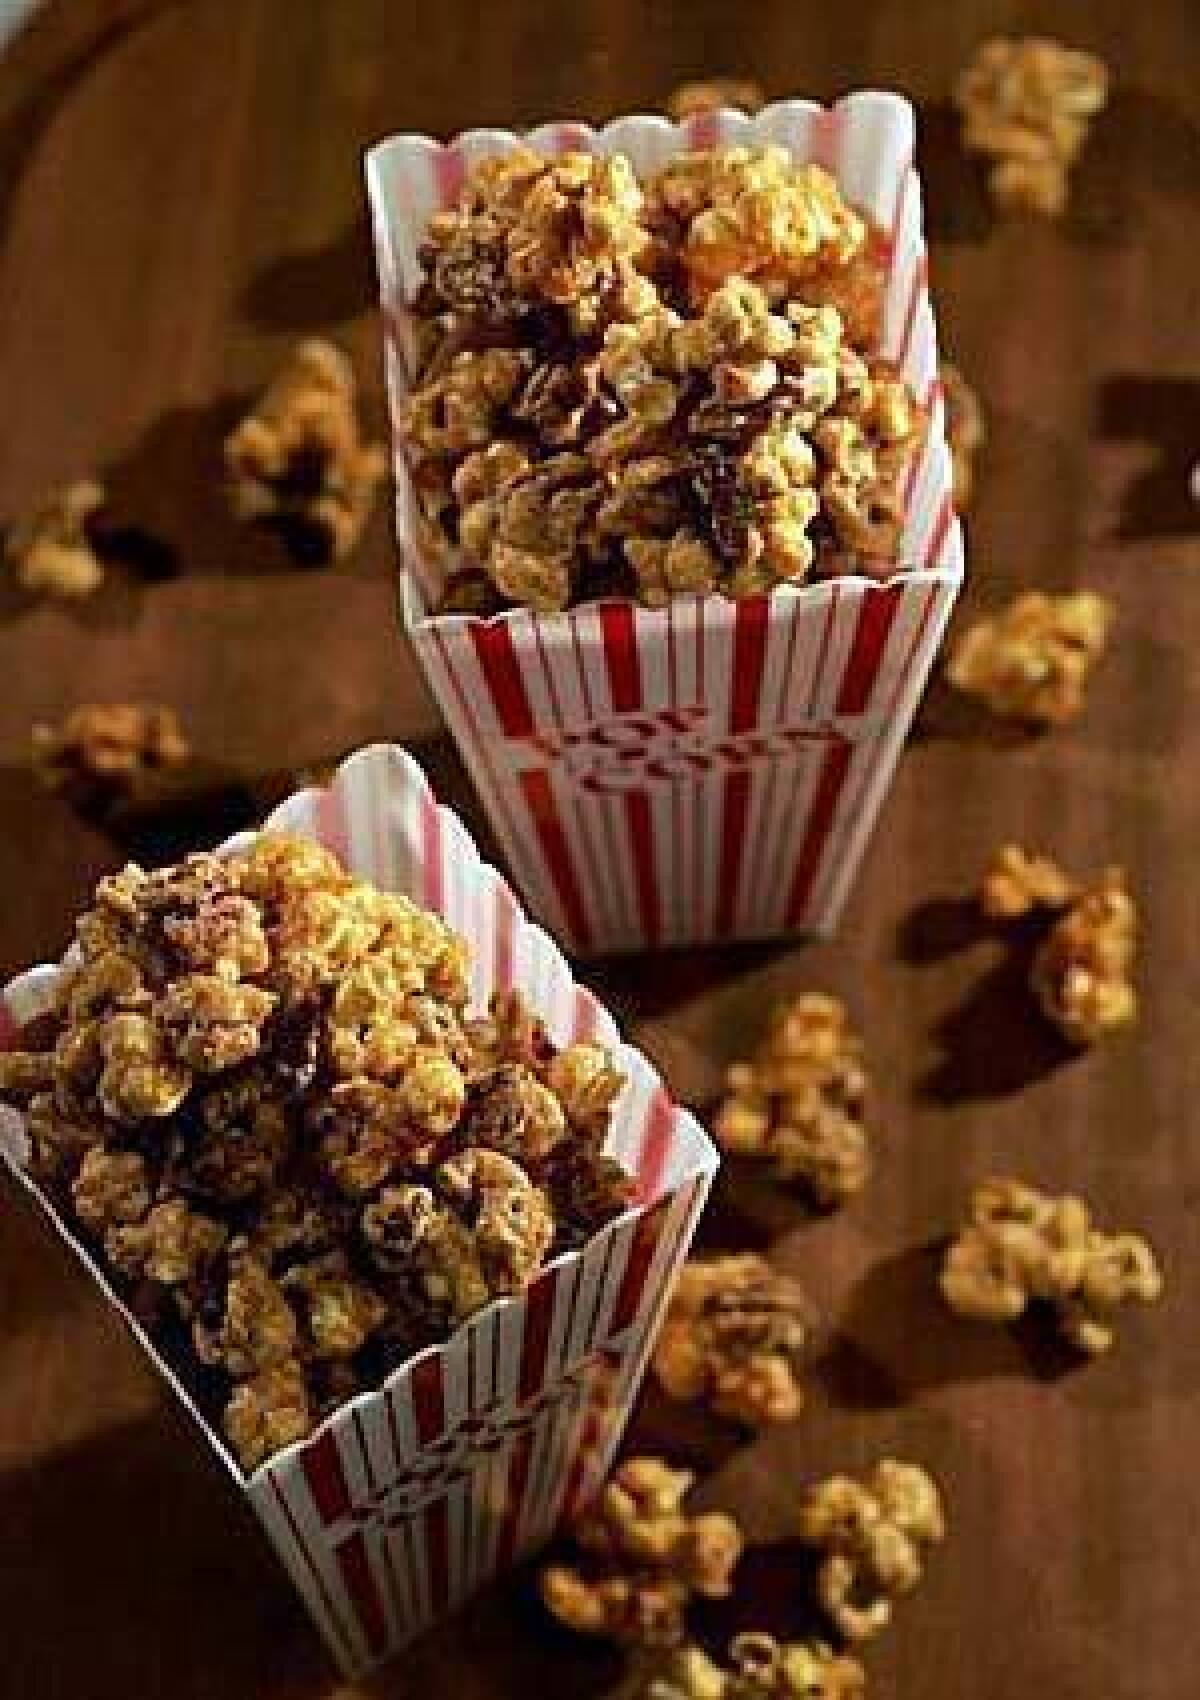 The movie experience simply isn't complete without popcorn. But why stop at plain popcorn when you can coat it in rich caramel and nuts? Better fix an extra batch -- this stuff'll go quickly.